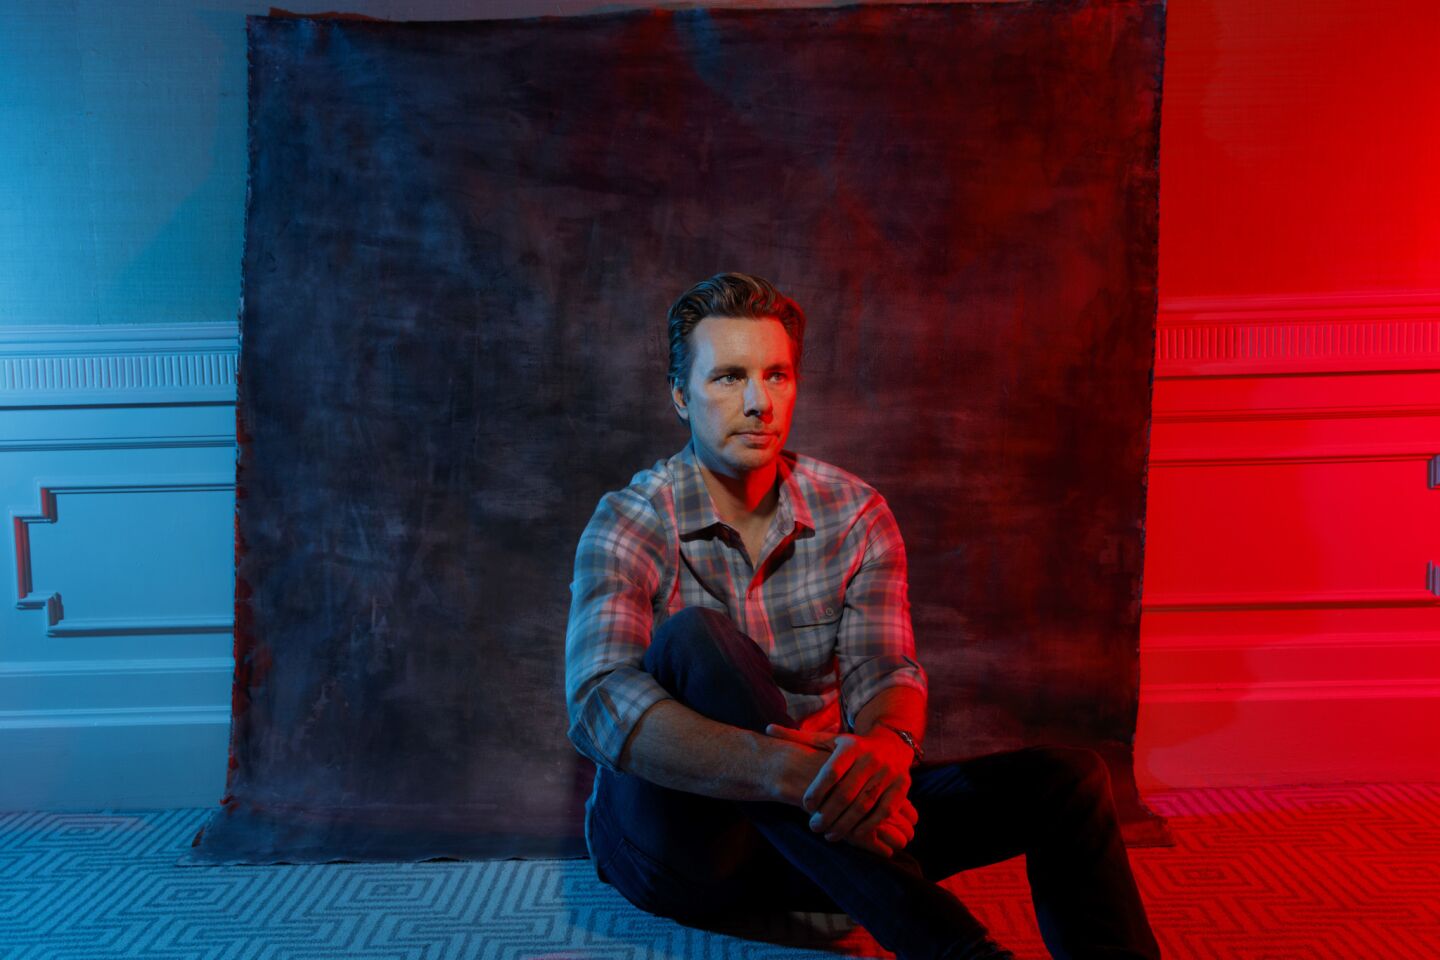 Celebrity portraits by The Times | Dax Shepard